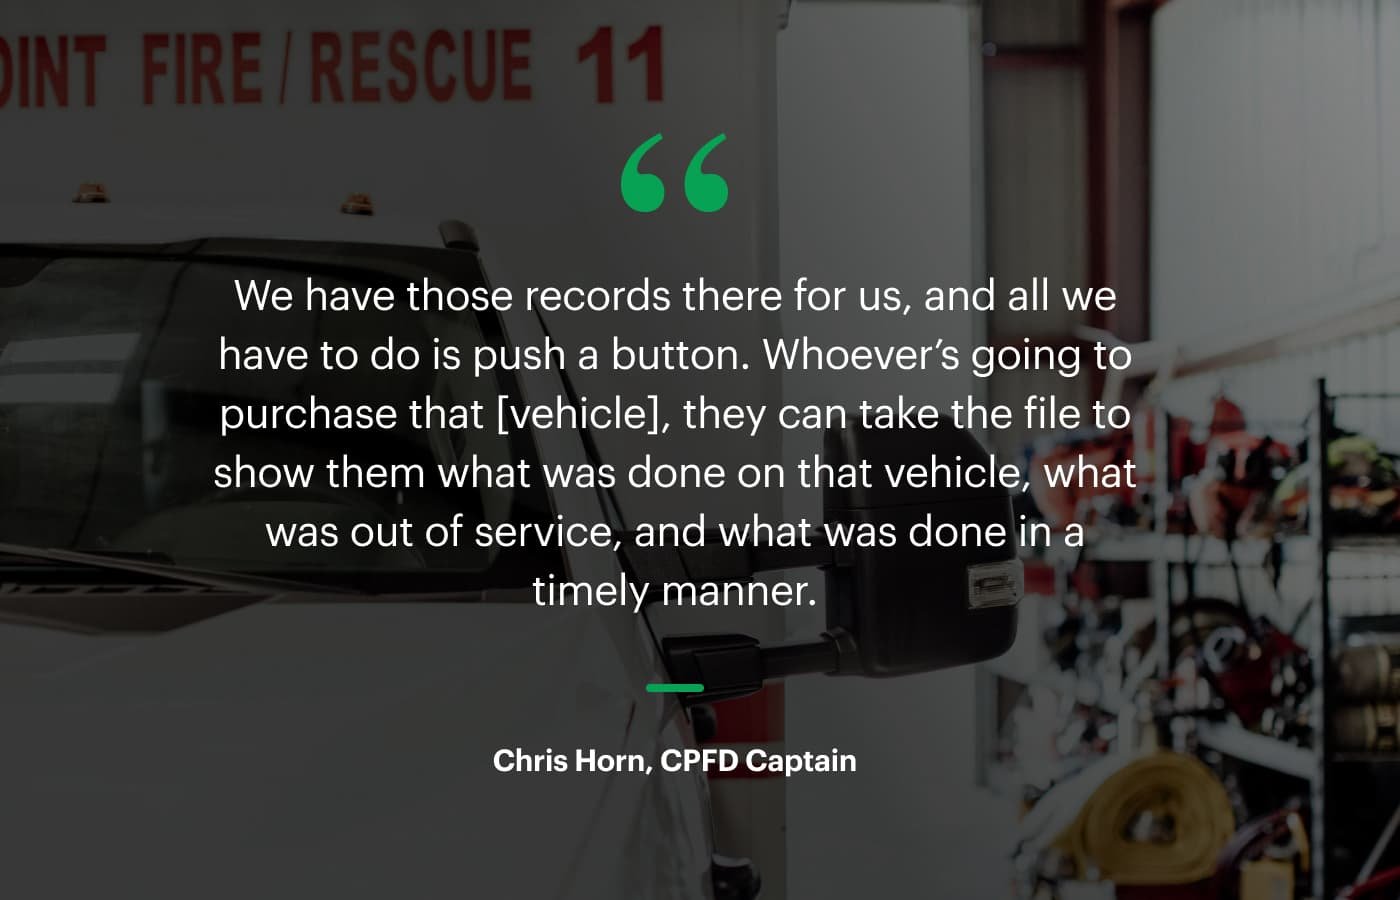 “We have those records there for us, and all we have to do is push a button. Whoever’s going to purchase that [vehicle], they can take the file to show them what was done on that vehicle, what was out of service, and what was done in a timely manner.” – Chris Horn, CPFD Captain